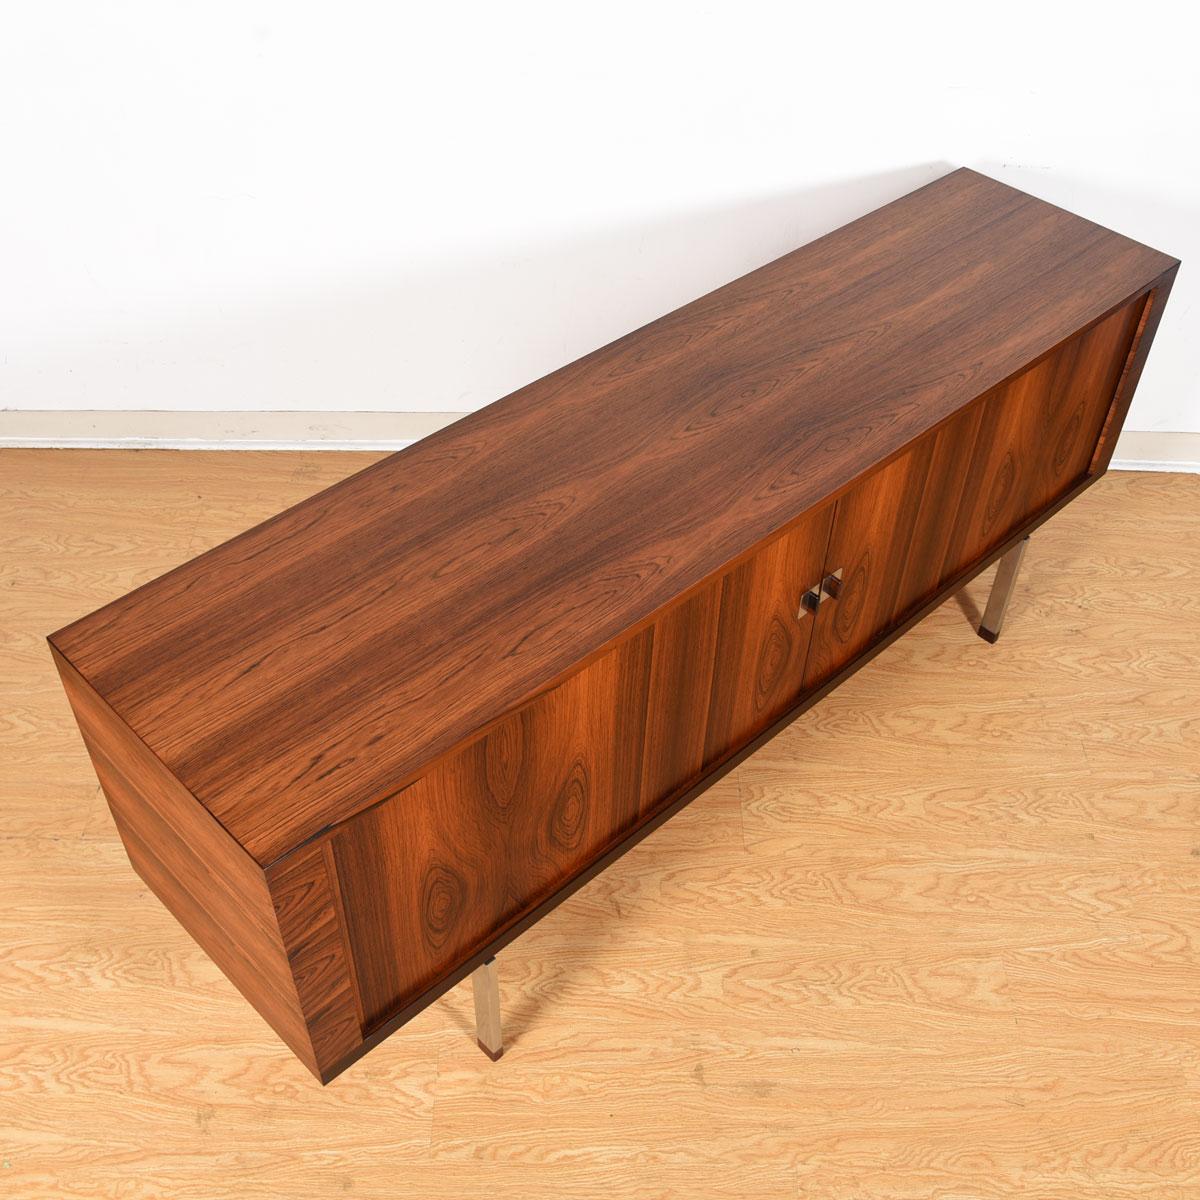 Long sideboard with brilliant Brazilian rosewood by Hans Wegner for Ry Mobler. Patterned figuring throughout the case and on the tambour doors of this piece. Rosewood capped chrome legs support the sideboard, which is paired with rosewood accented